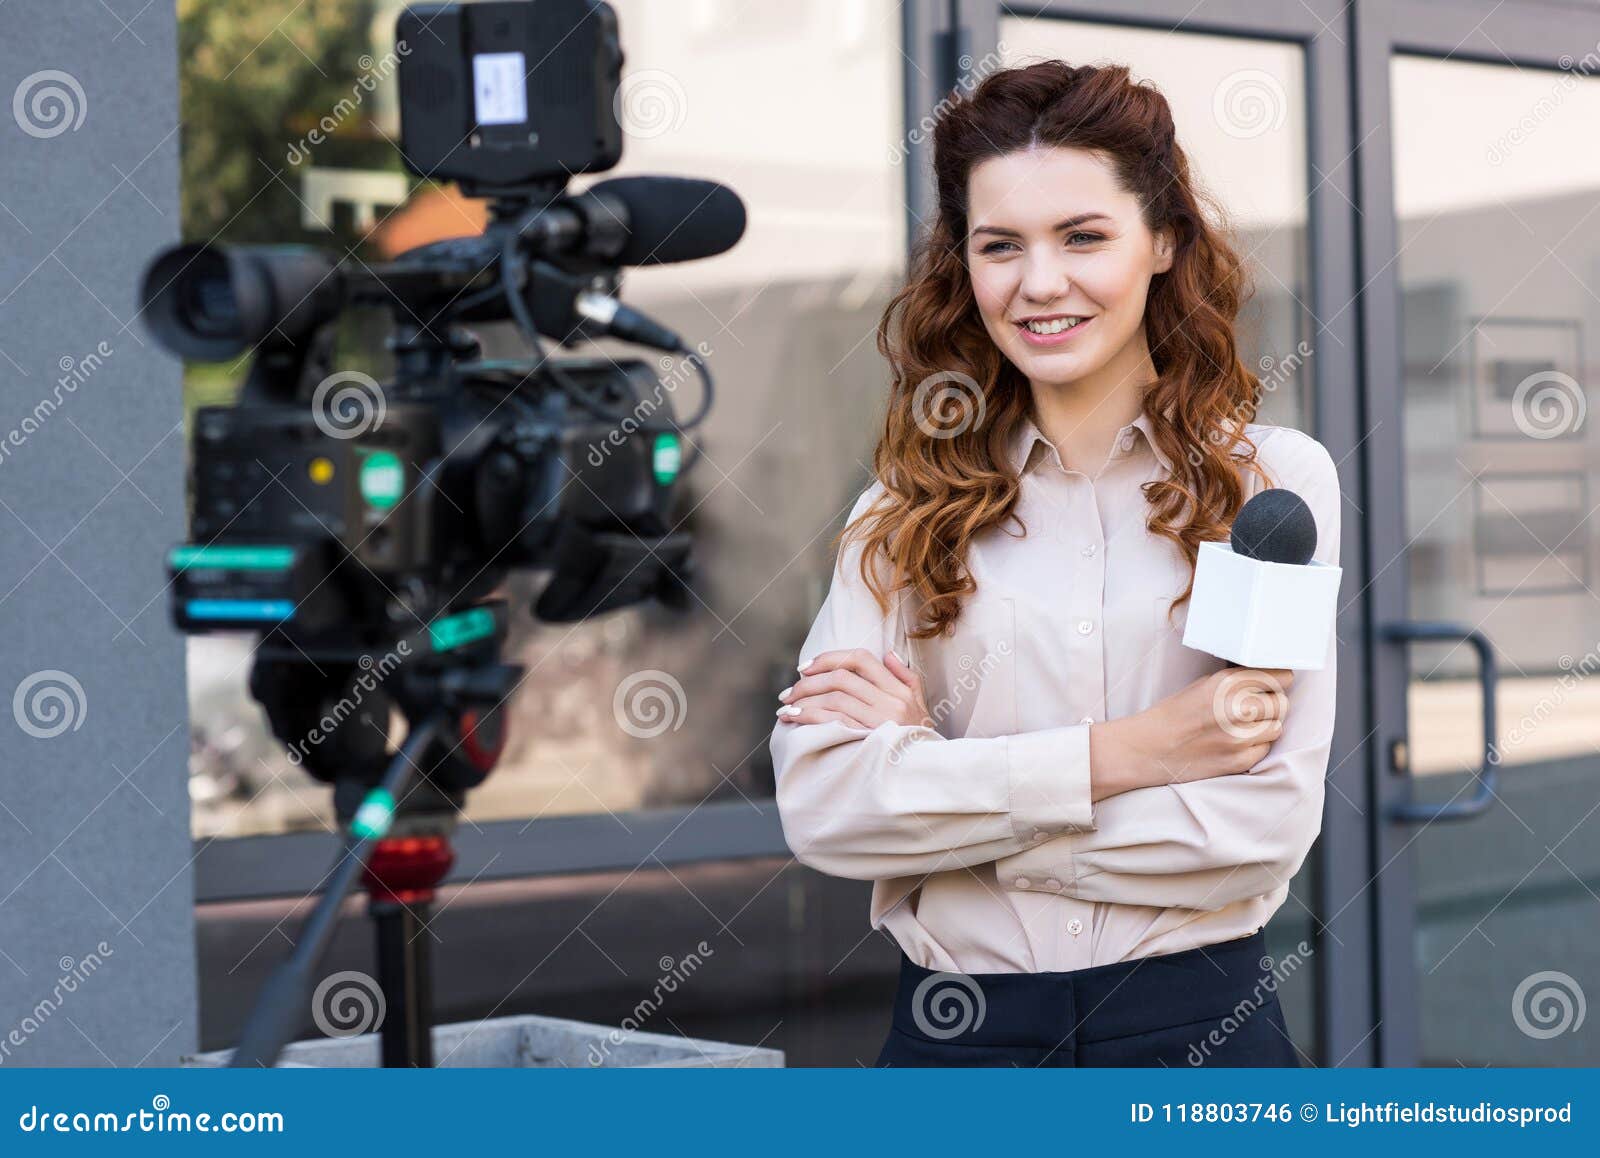 smiling journalist with microphone standing in front of digital